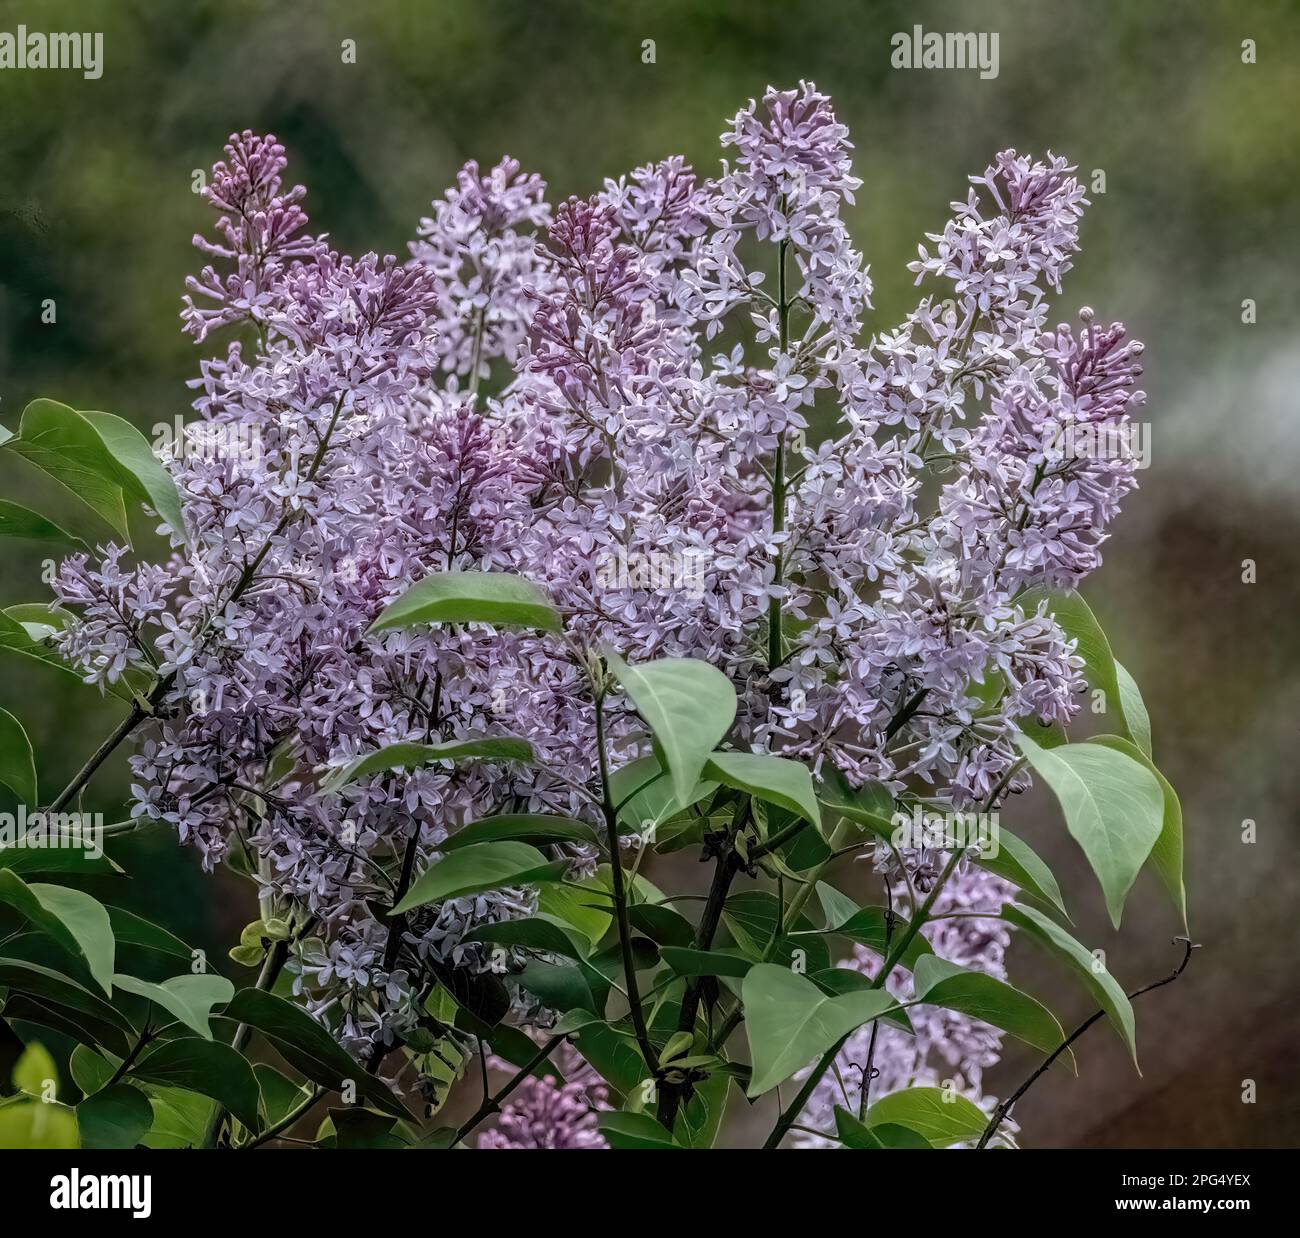 Blooming purple lilac blossoms on a spring evening in Taylors Falls, Minnesota USA. Stock Photo